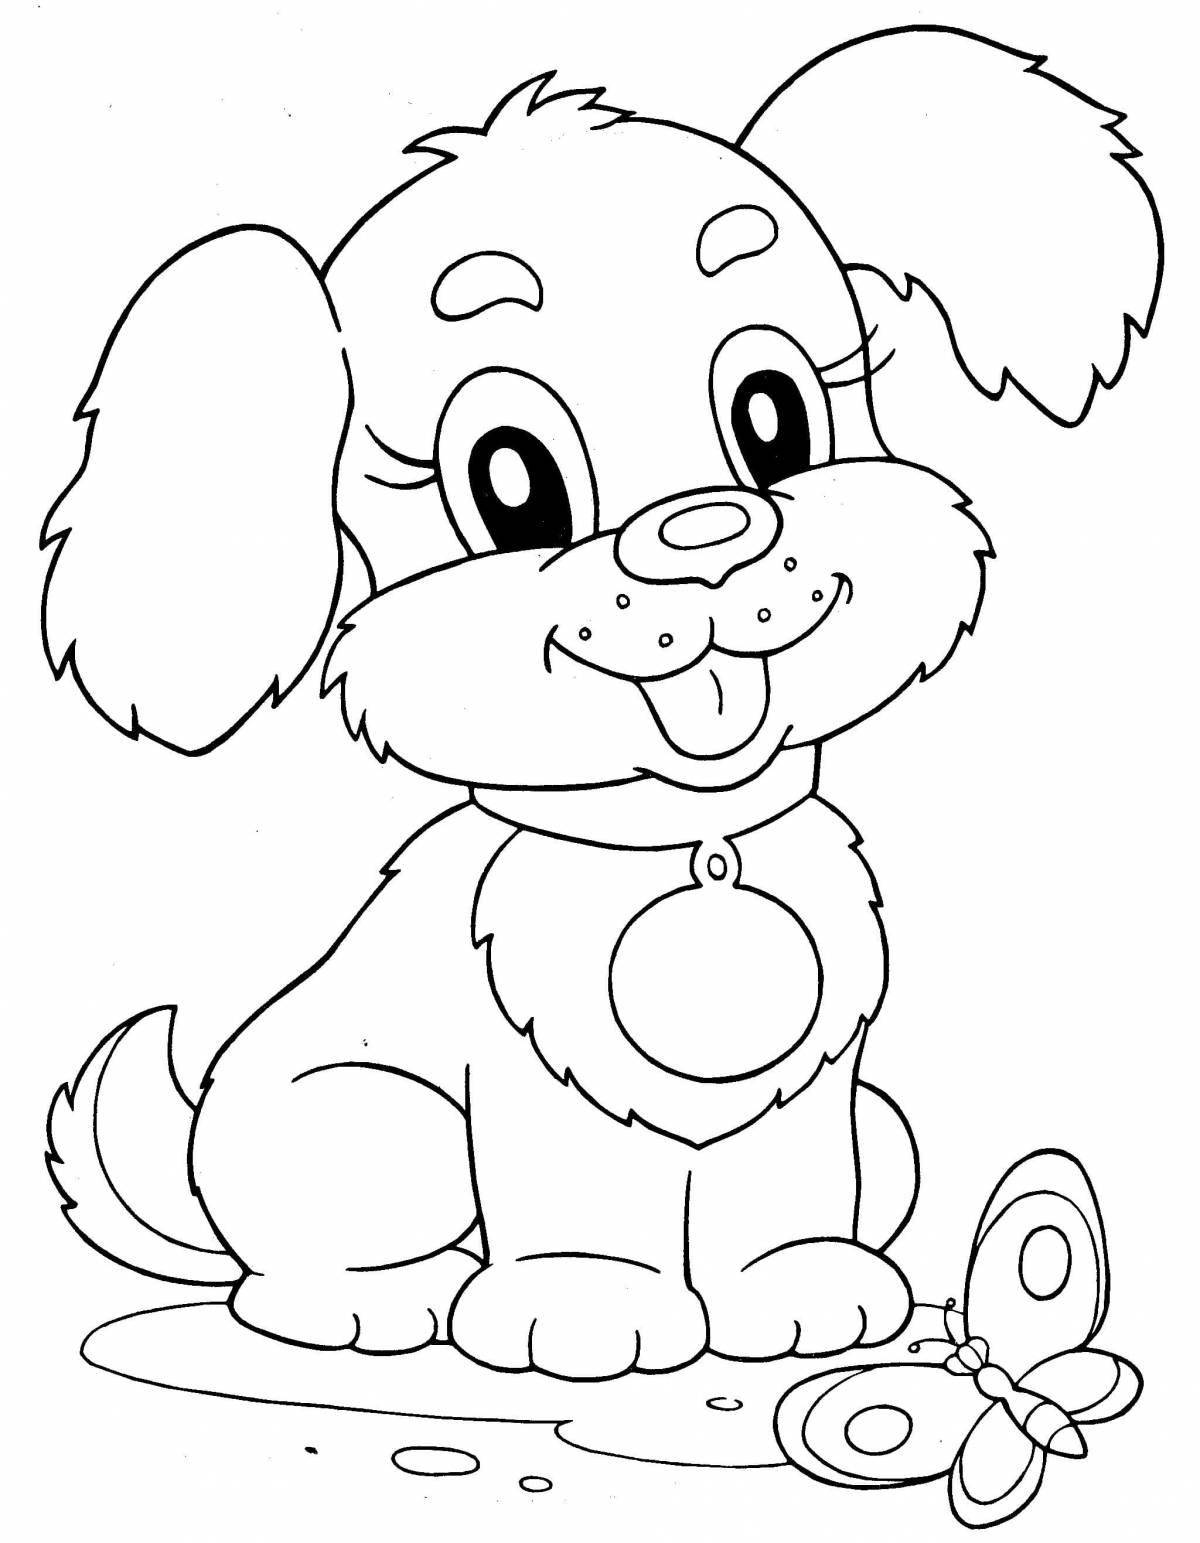 Fabulous animals coloring pages for kids